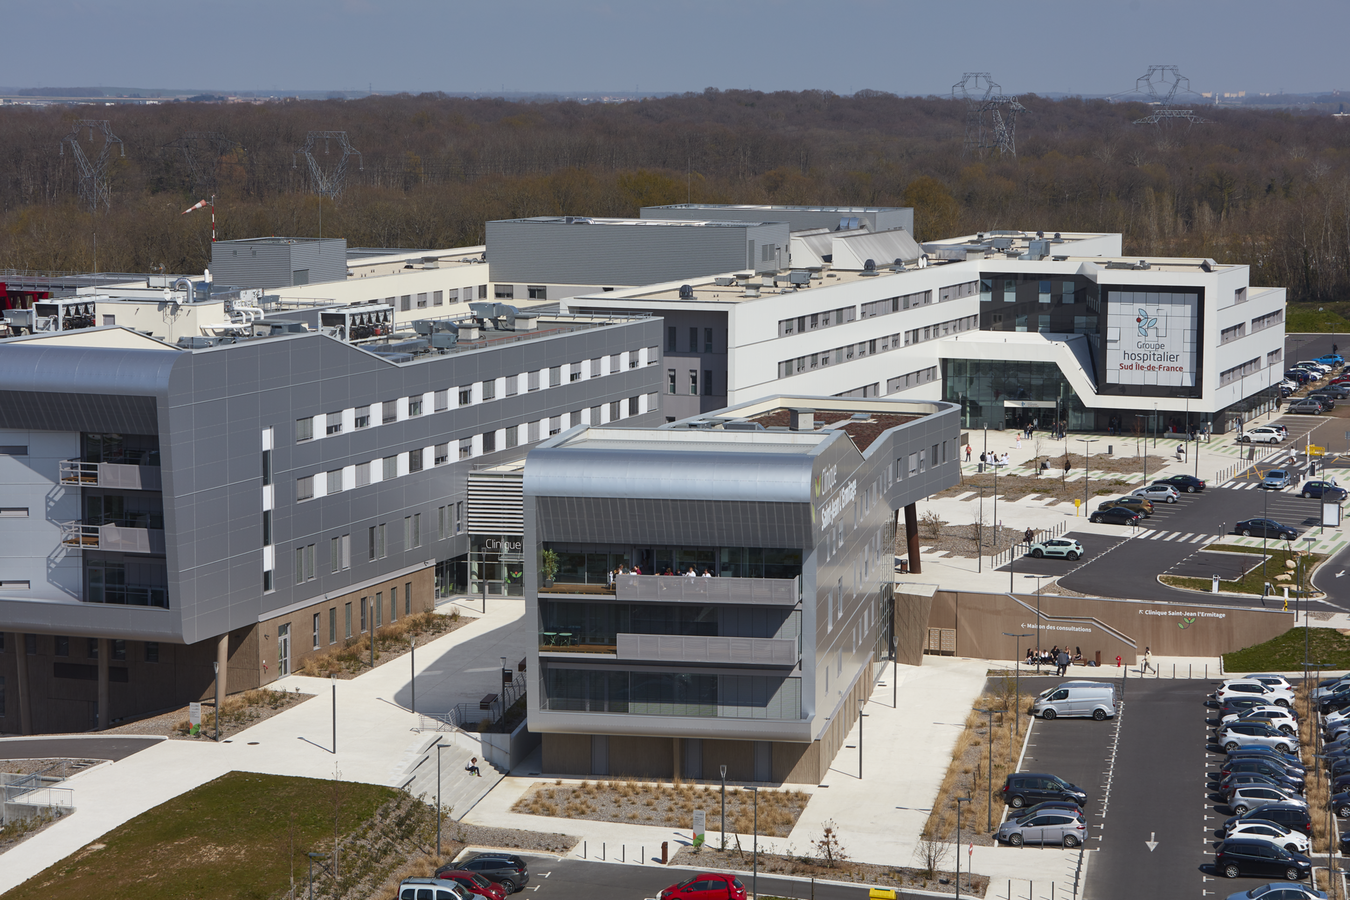 The Seine-et-Marne Santépôle based in Melun is the reference healthcare facility in southern Île-de-France region, and it is composed of a public structure and a private clinic, Saint Jacques l’Ermitage, located in the same building complex.